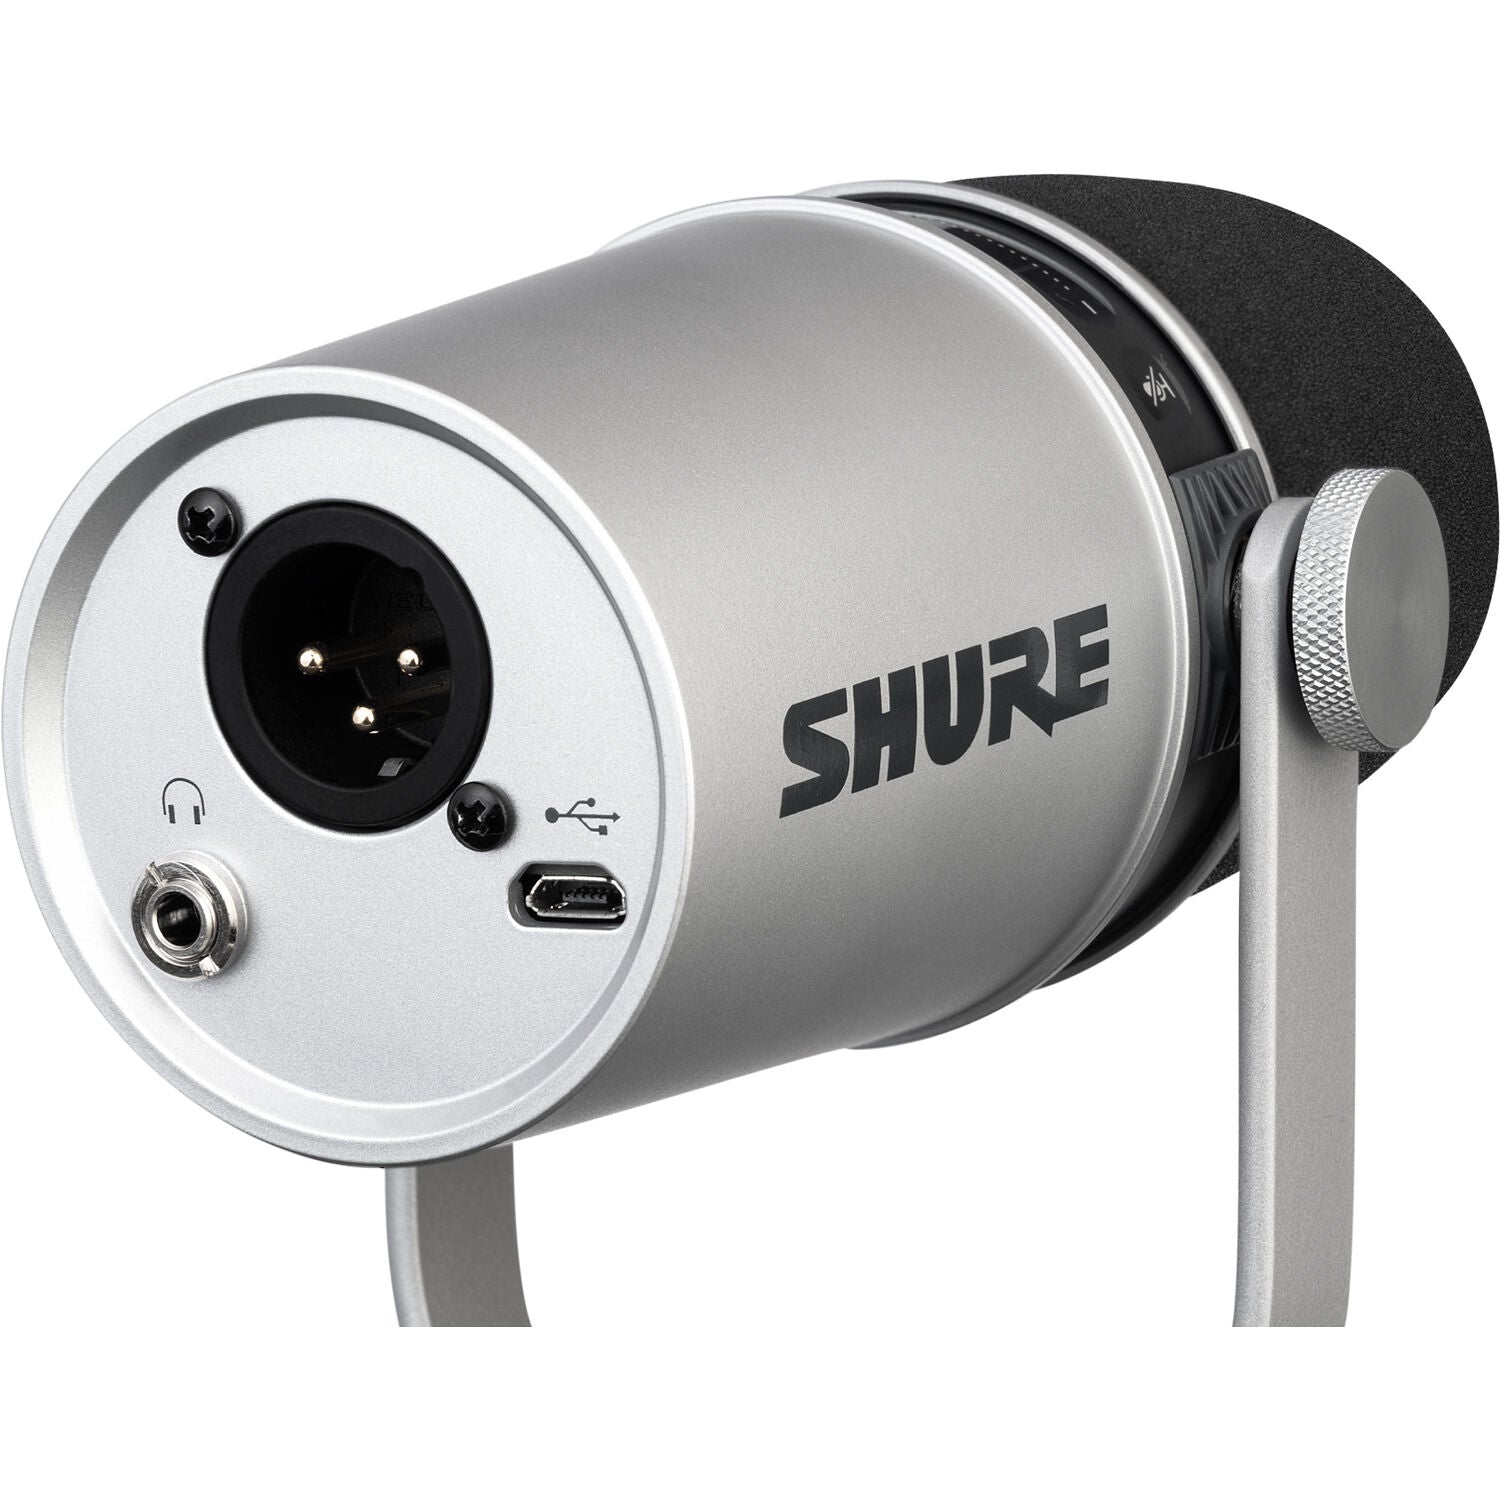 Shure Silver Podcasting Microphone w/USB-A & USB-C Cables